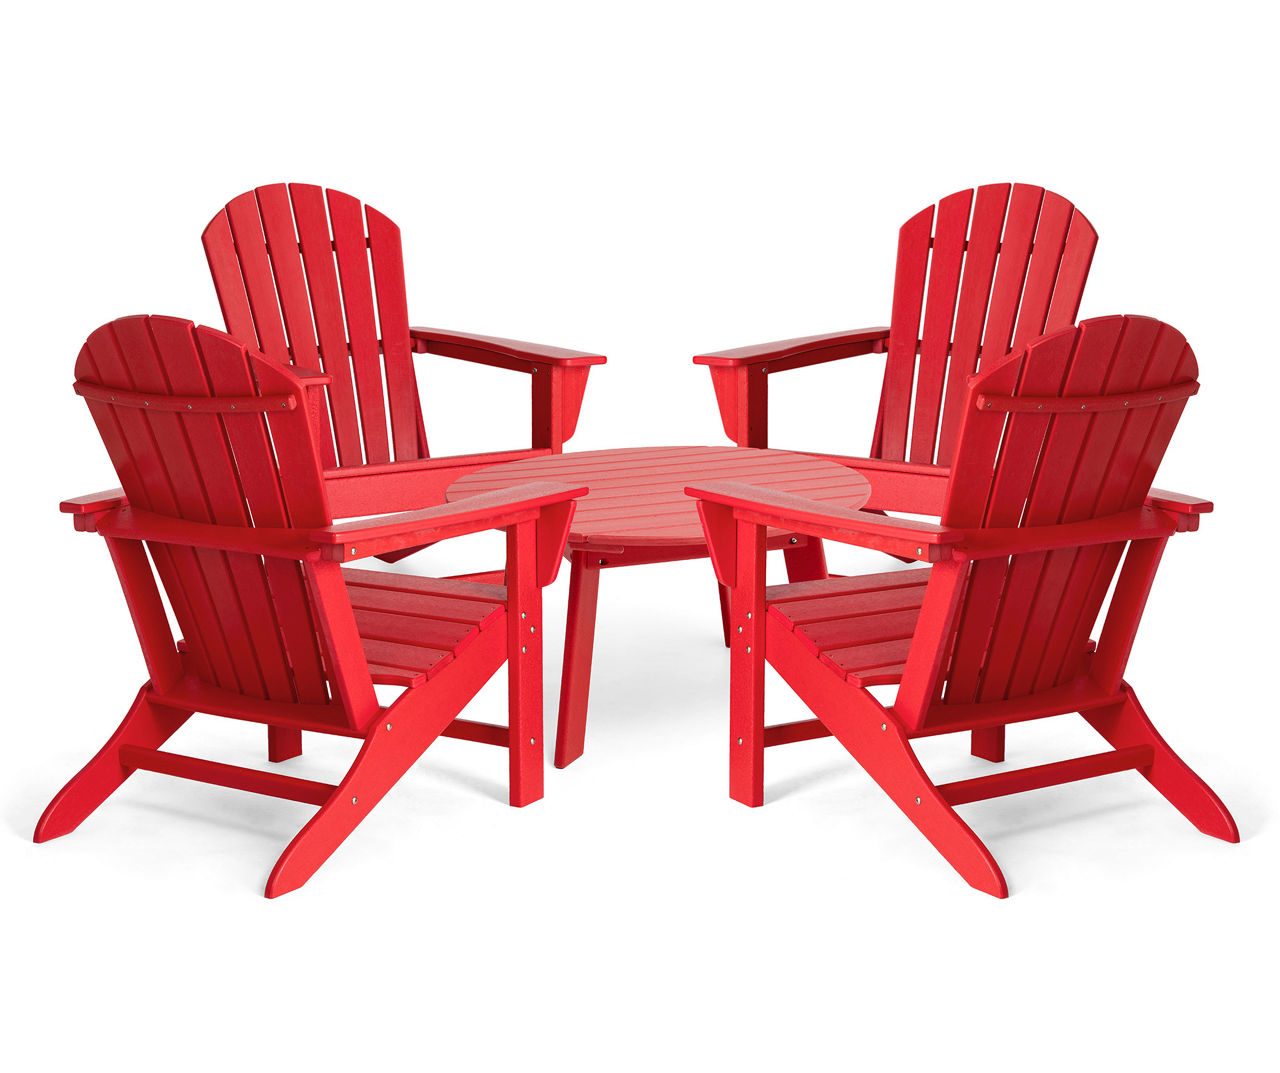 5-Piece Outdoor Patio Red HDPE Adirondack Chair and Coffee Table Set1pc 36"D Coffee Table4pcs Adirondack Chairs (KD)